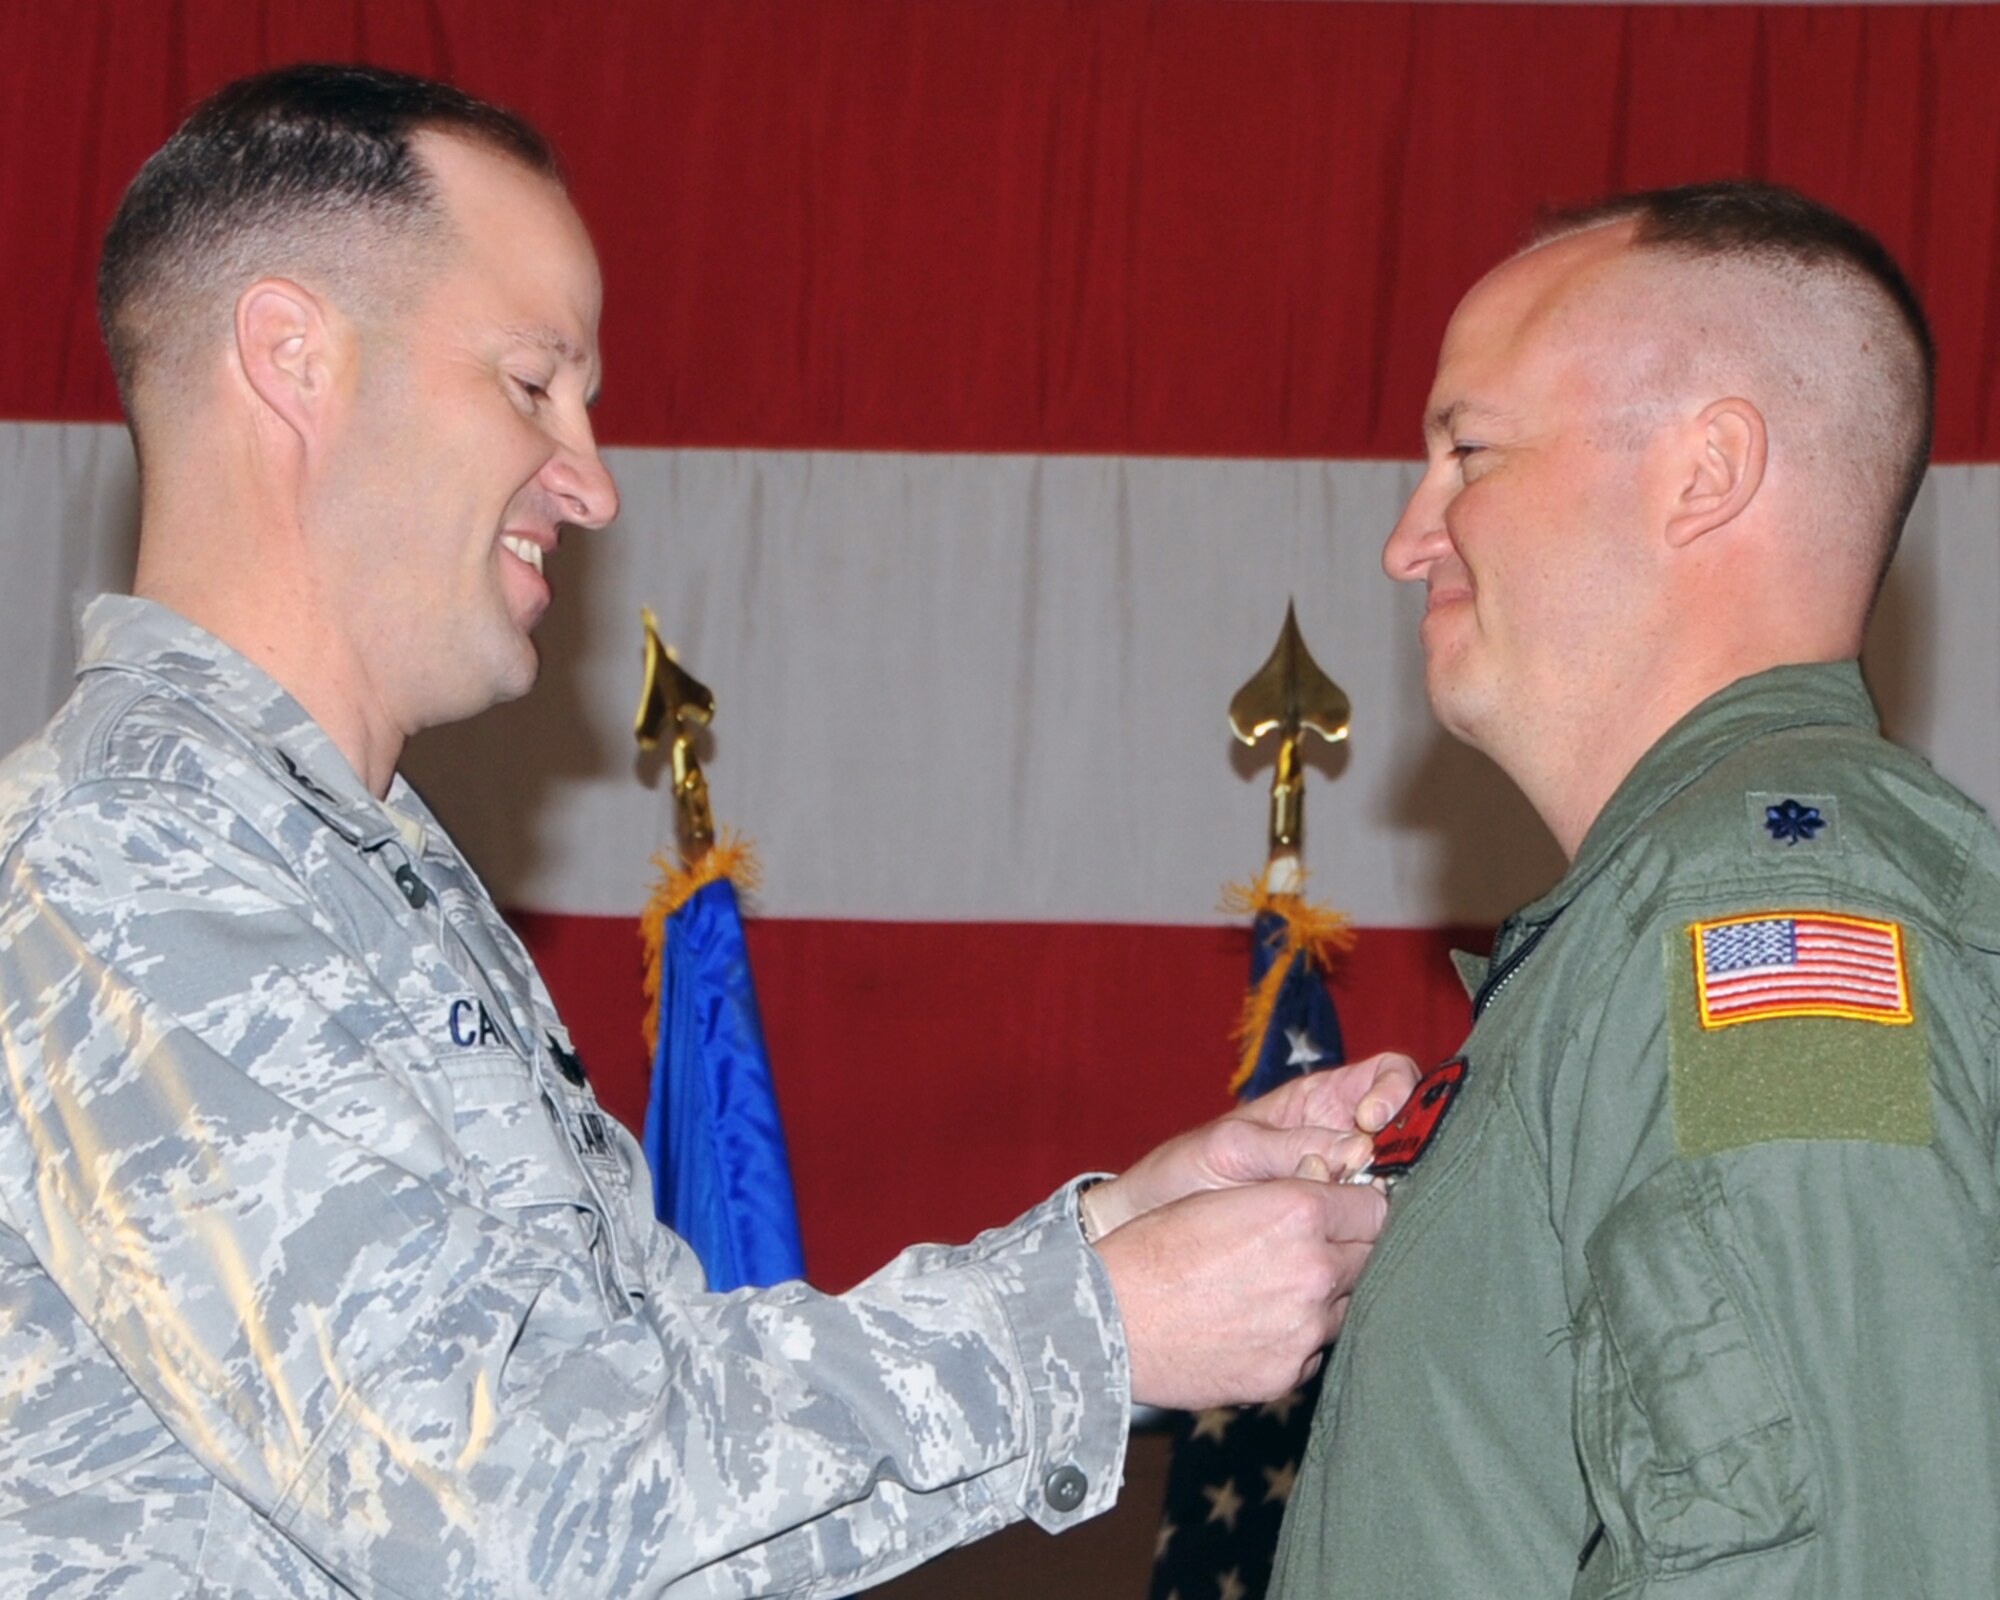 KIRTLAND AFB N.M. -- Col. James Cardoso, 58th Special Operations Wing commander, left, presents the Bronze Star Medal to Lt. Col. Brandon Deacon, 512th Rescue Squadron director of operations, during a ceremony Jan. 19 at Kirtland Air Force Base. Deacon received the medal for actions during a year-long deployment to Iraq. (Photo by Todd Berenger)